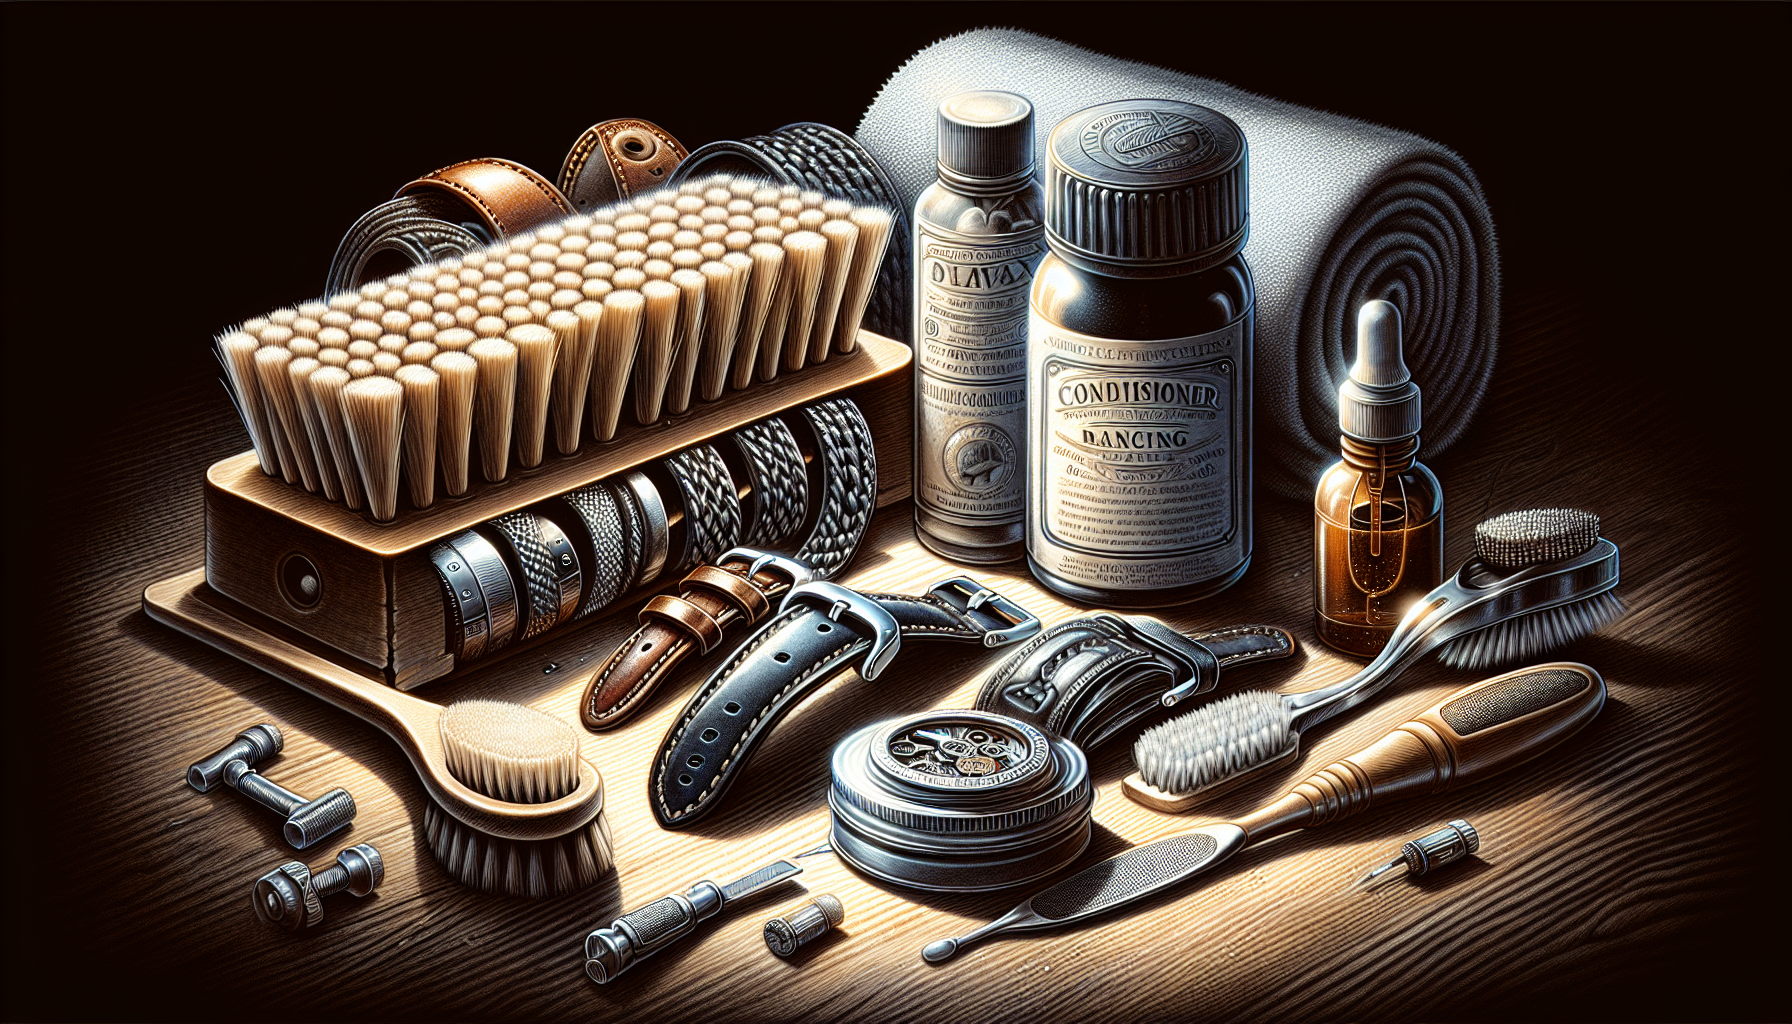 Illustration of cleaning and conditioning tools for watch straps